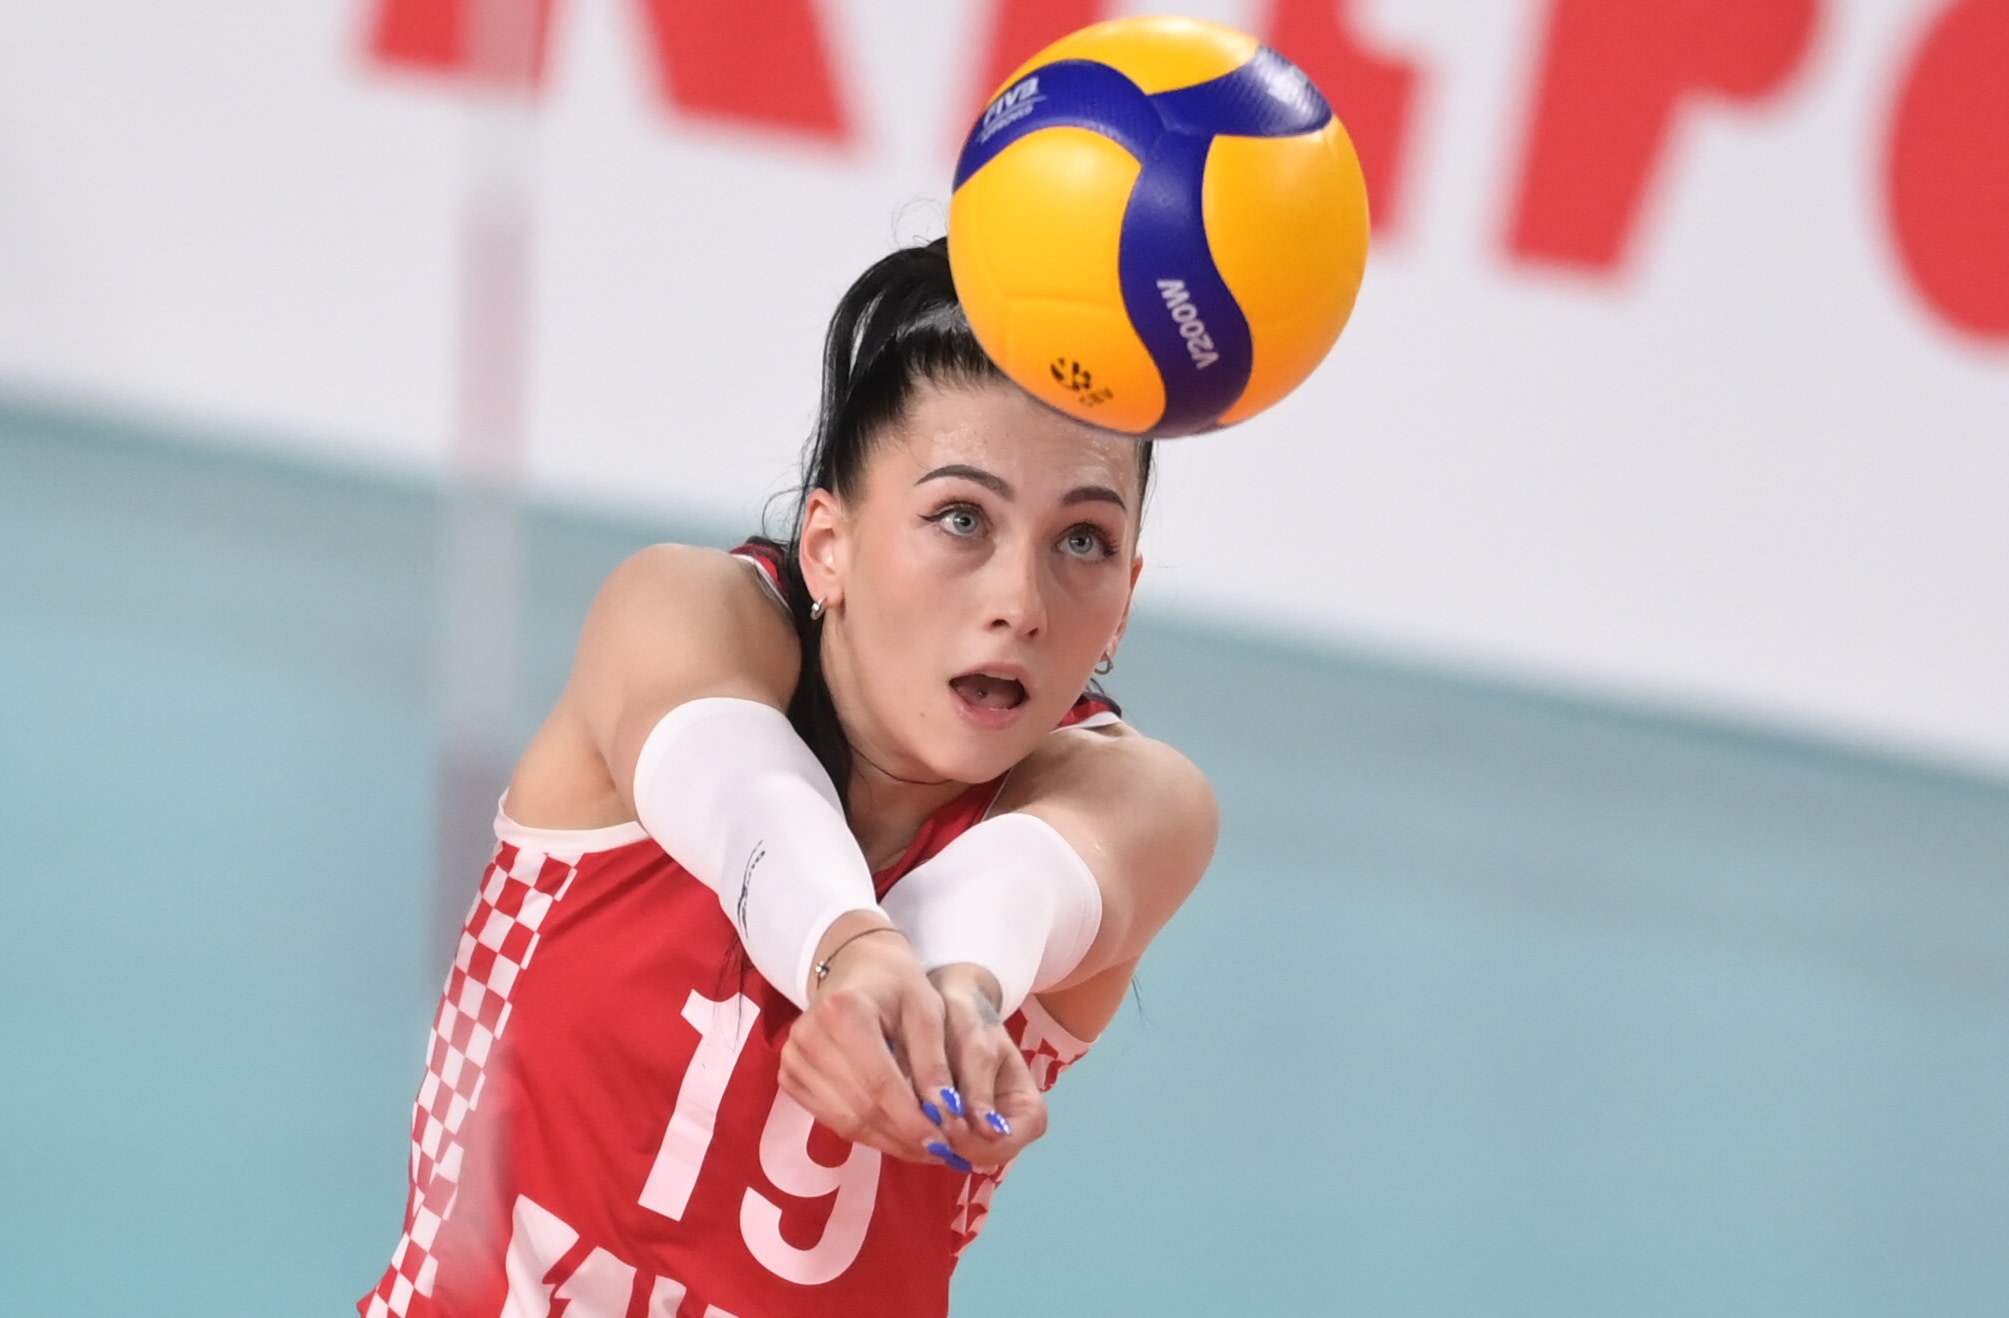 Volleyball Challenger Cup battles coming up in Croatia and Korea volleyballworld